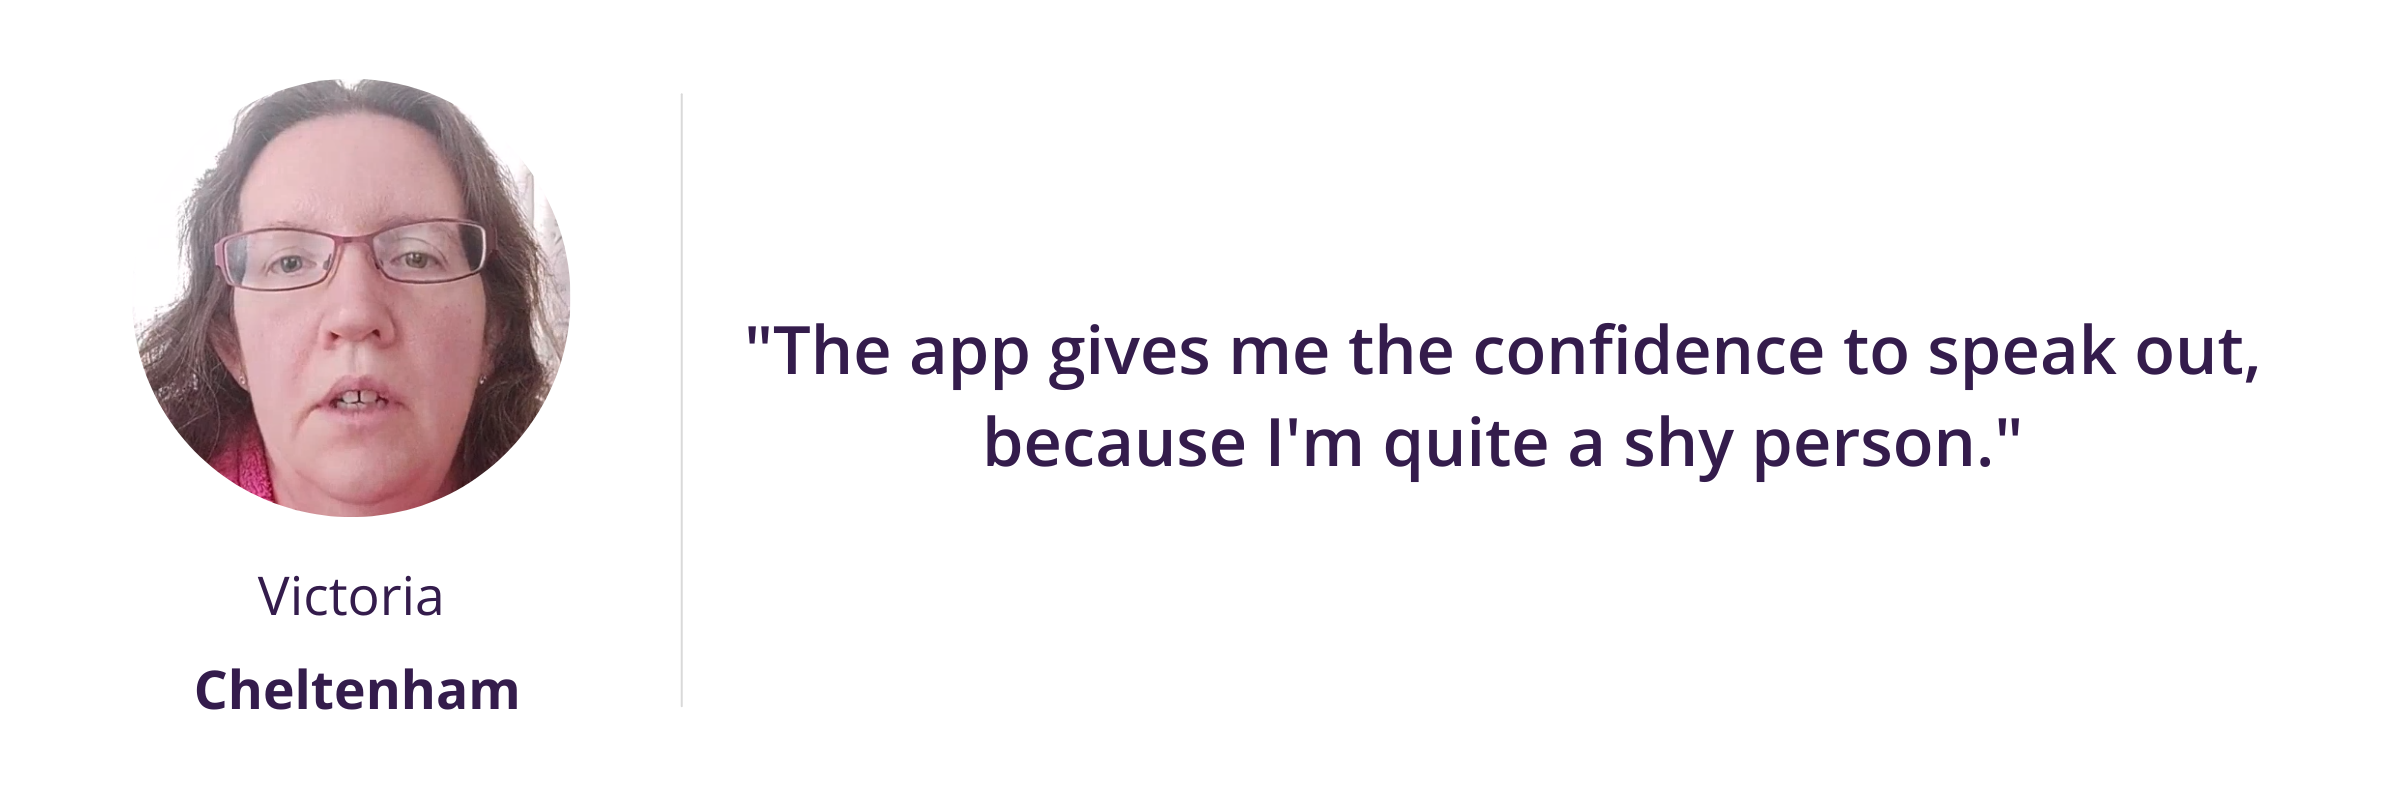 The app gives me the confidence to speak out, because I'm quite a shy person.